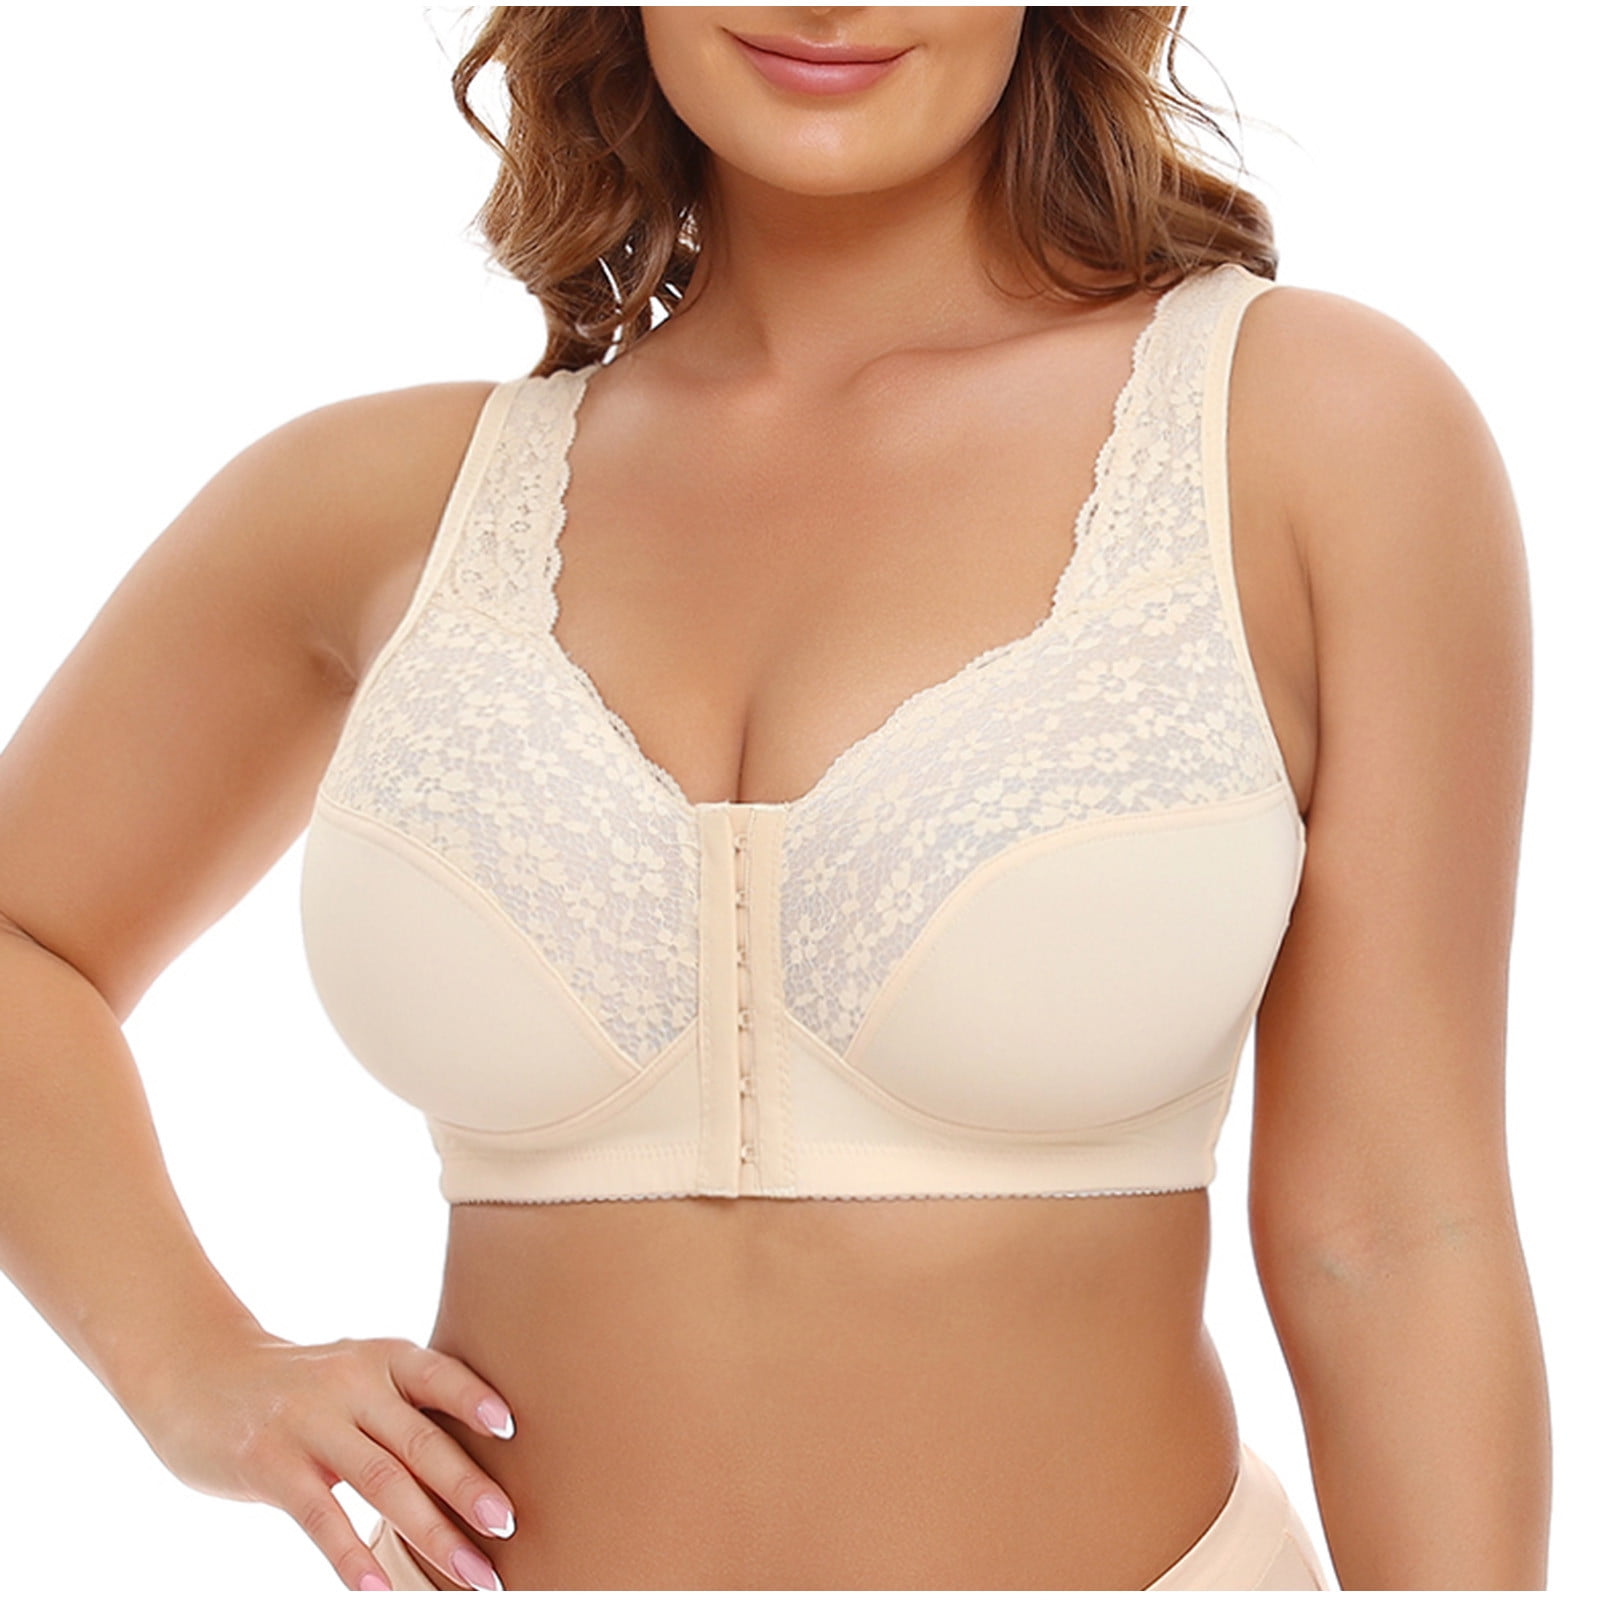 Plus Size Bras for Women, Comfort Wireless Bras with Support and Lift,  Front Closure Bras for Women Plus Size, Beige, XX-Large